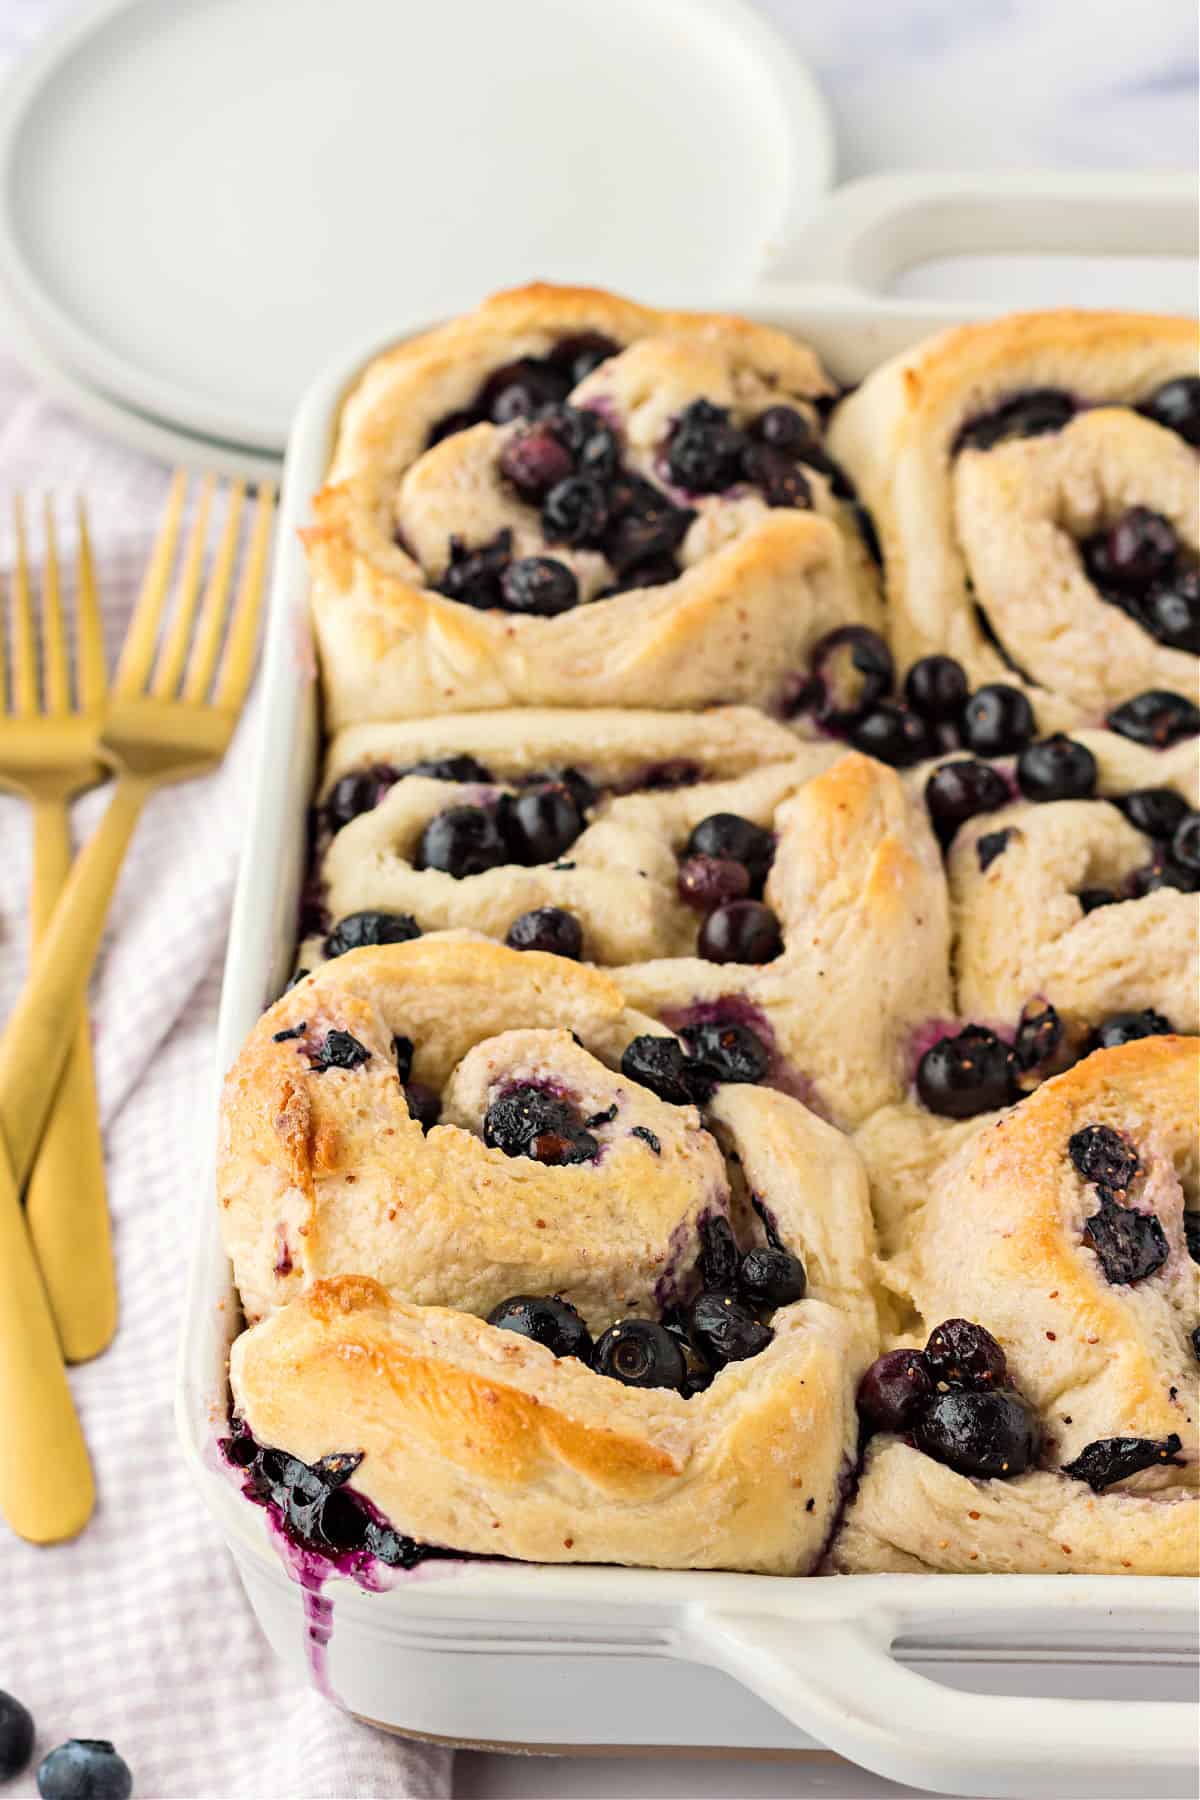 Unfrosted blueberry rolls baked in a baking dish.